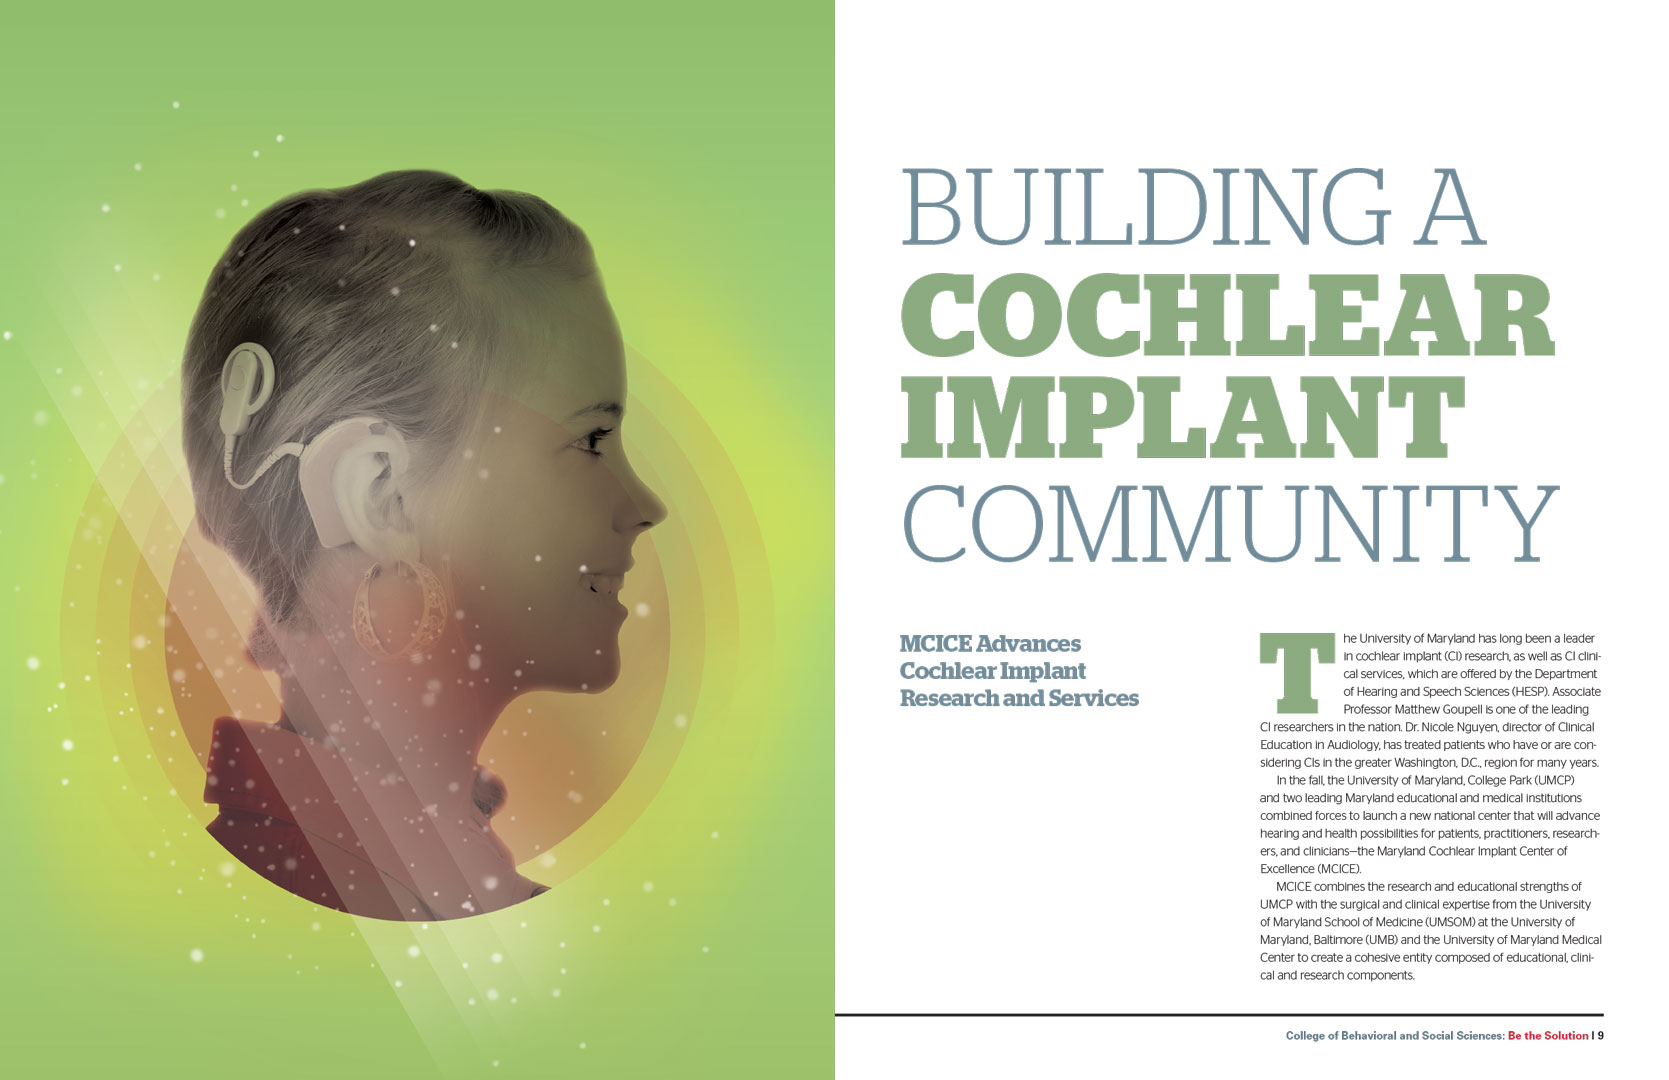 Building a Cochlear Implant Community